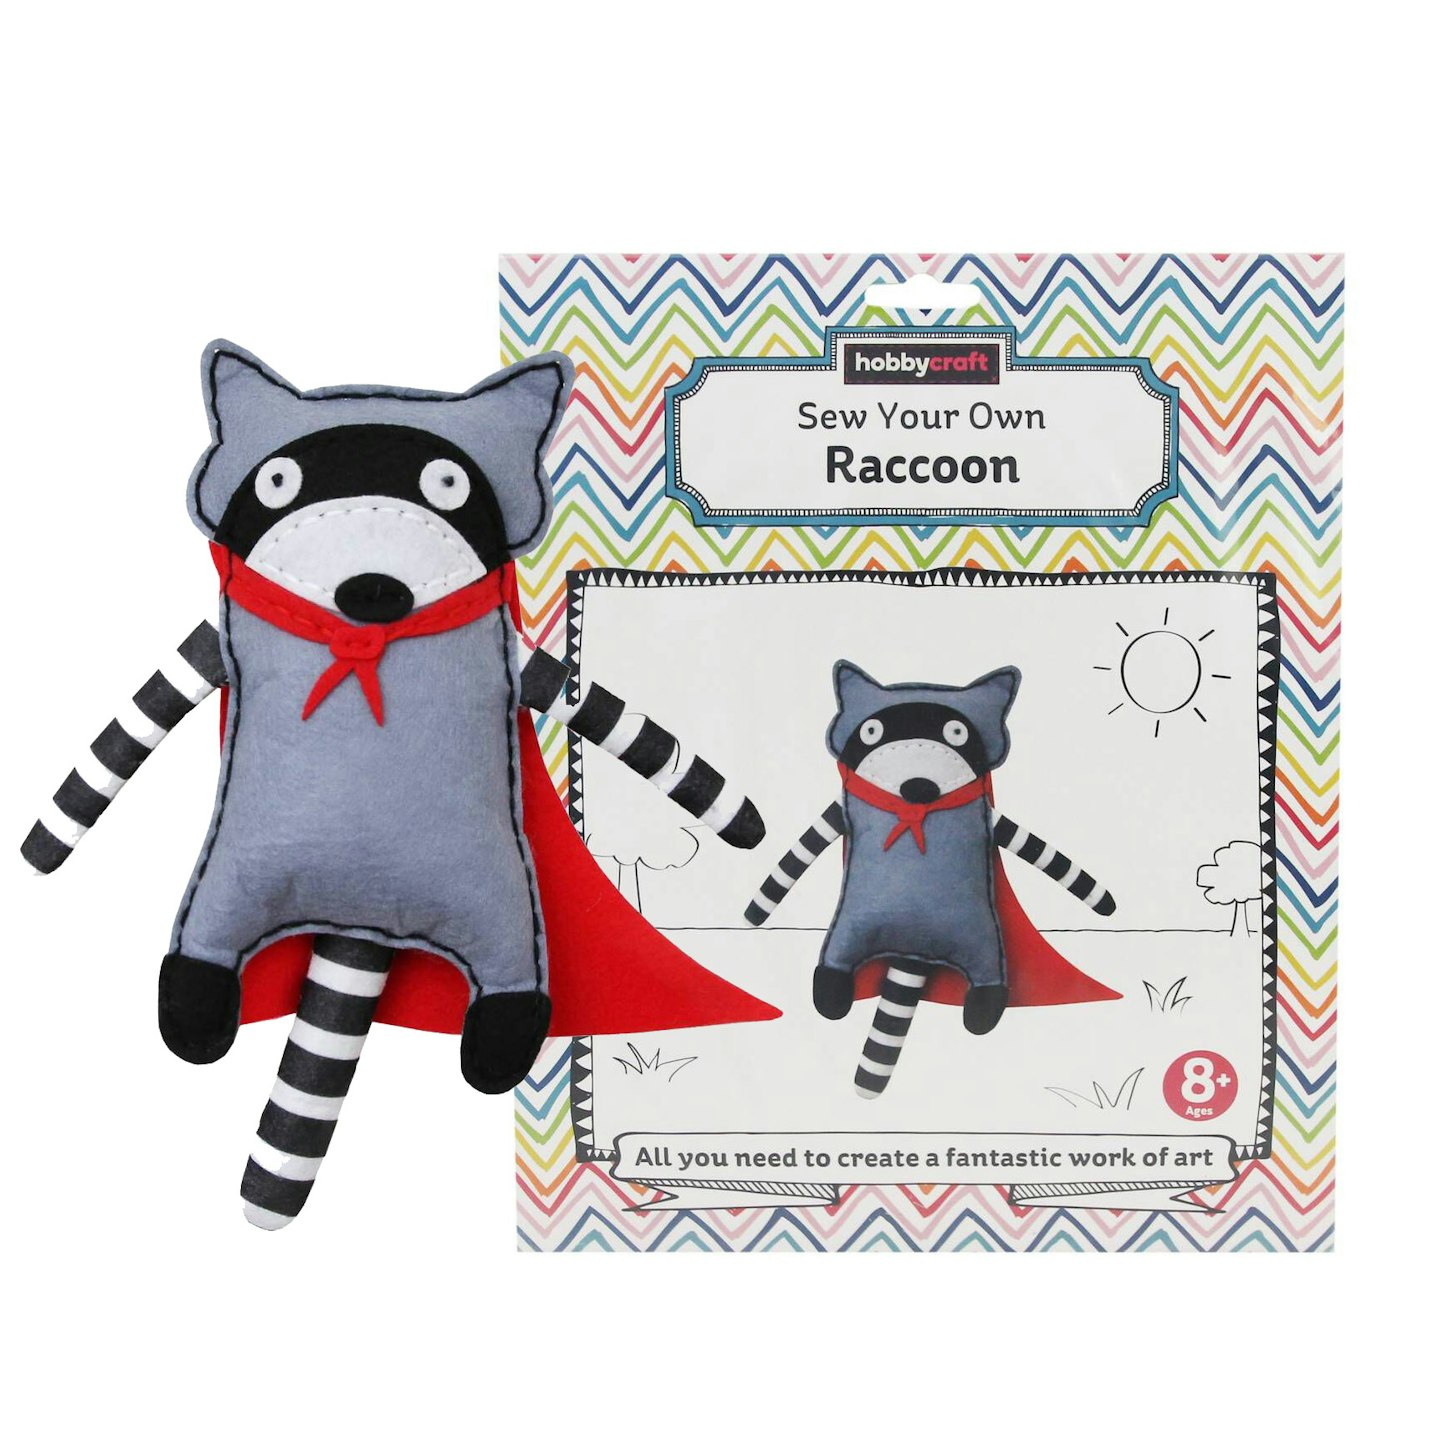 Sew Your Own Raccoon Kit